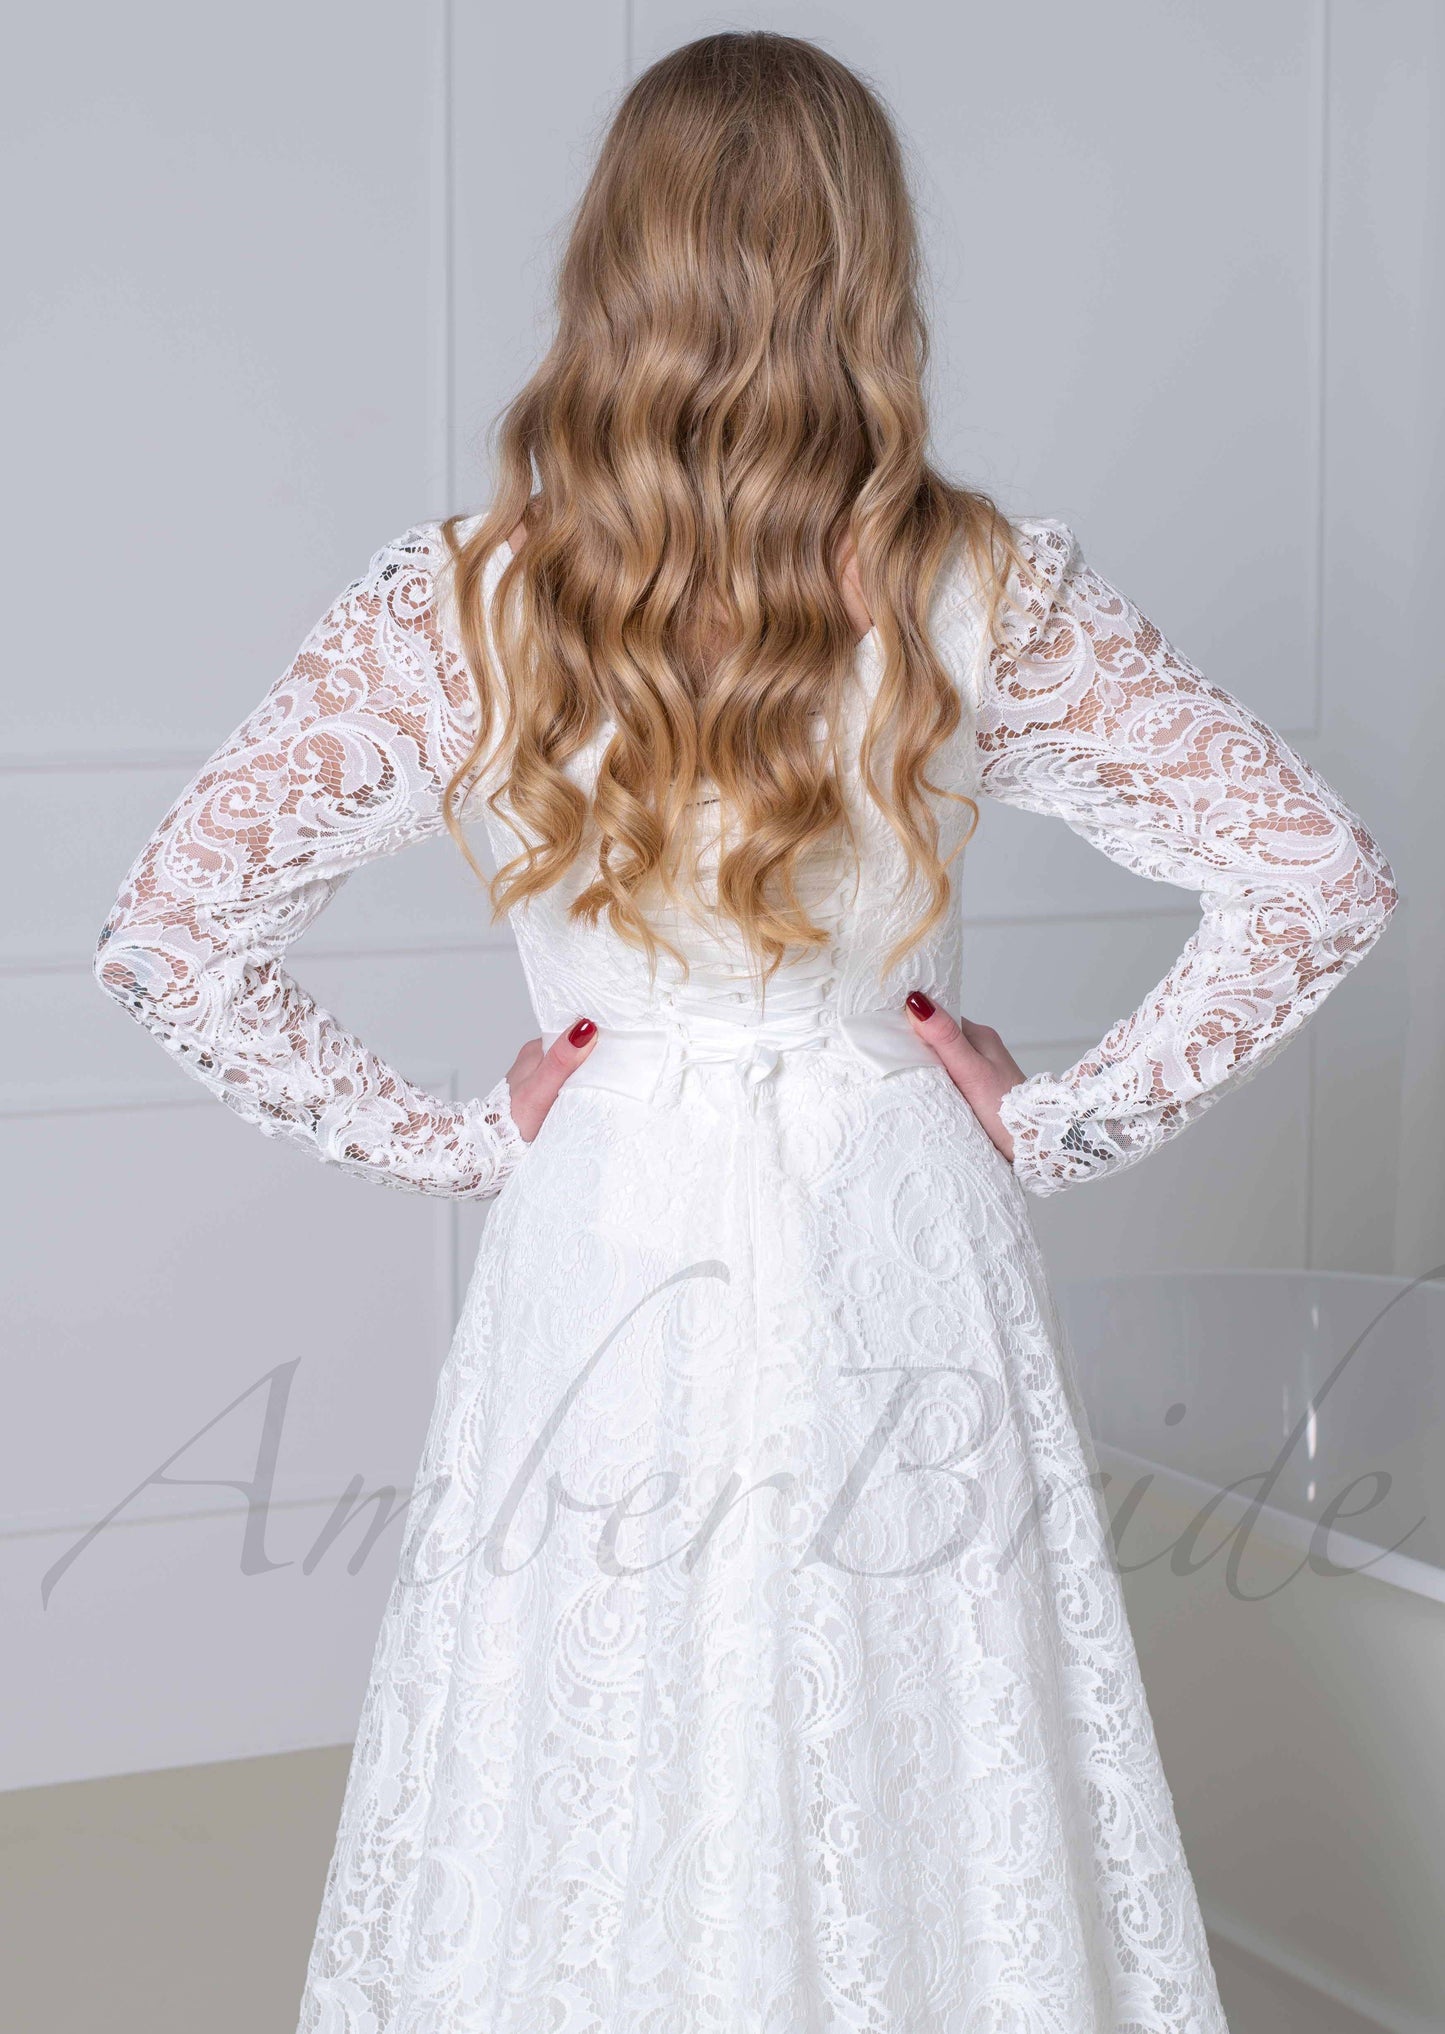 Boho A Line All Lace Wedding Dress with Long Sleeve and Square Neck